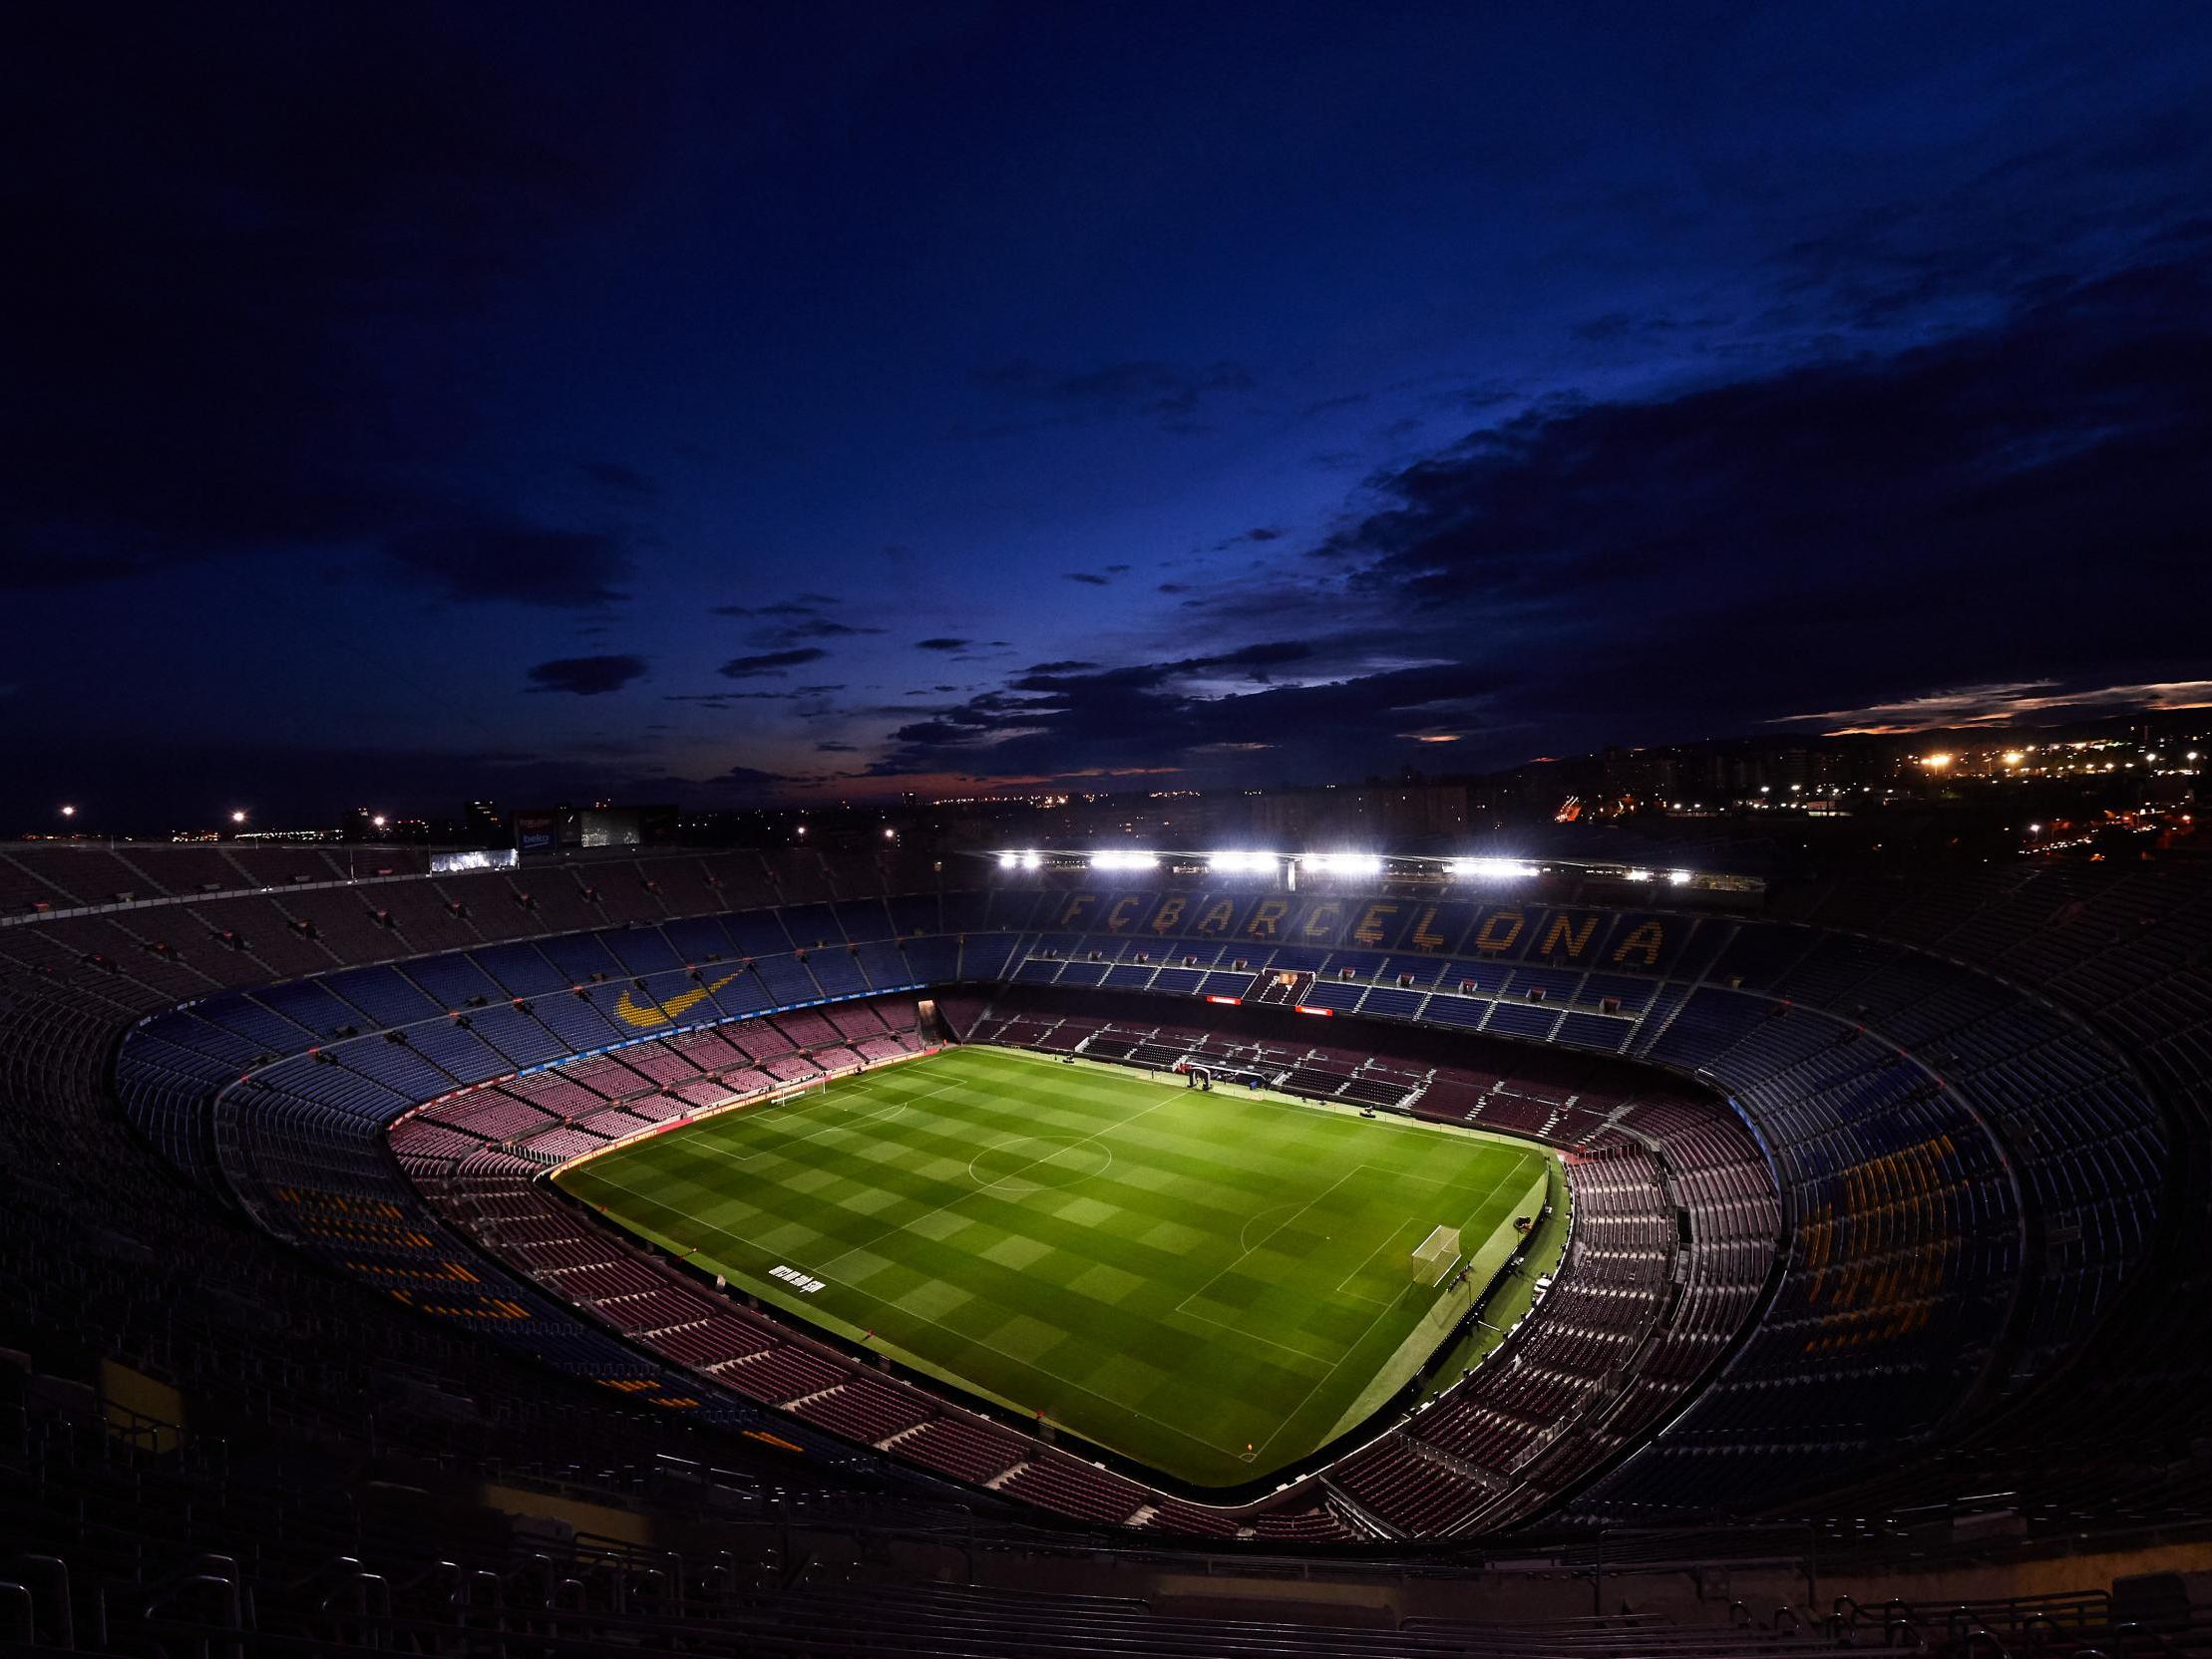 The Nou Camp will host the first clasico of the season before Christmas